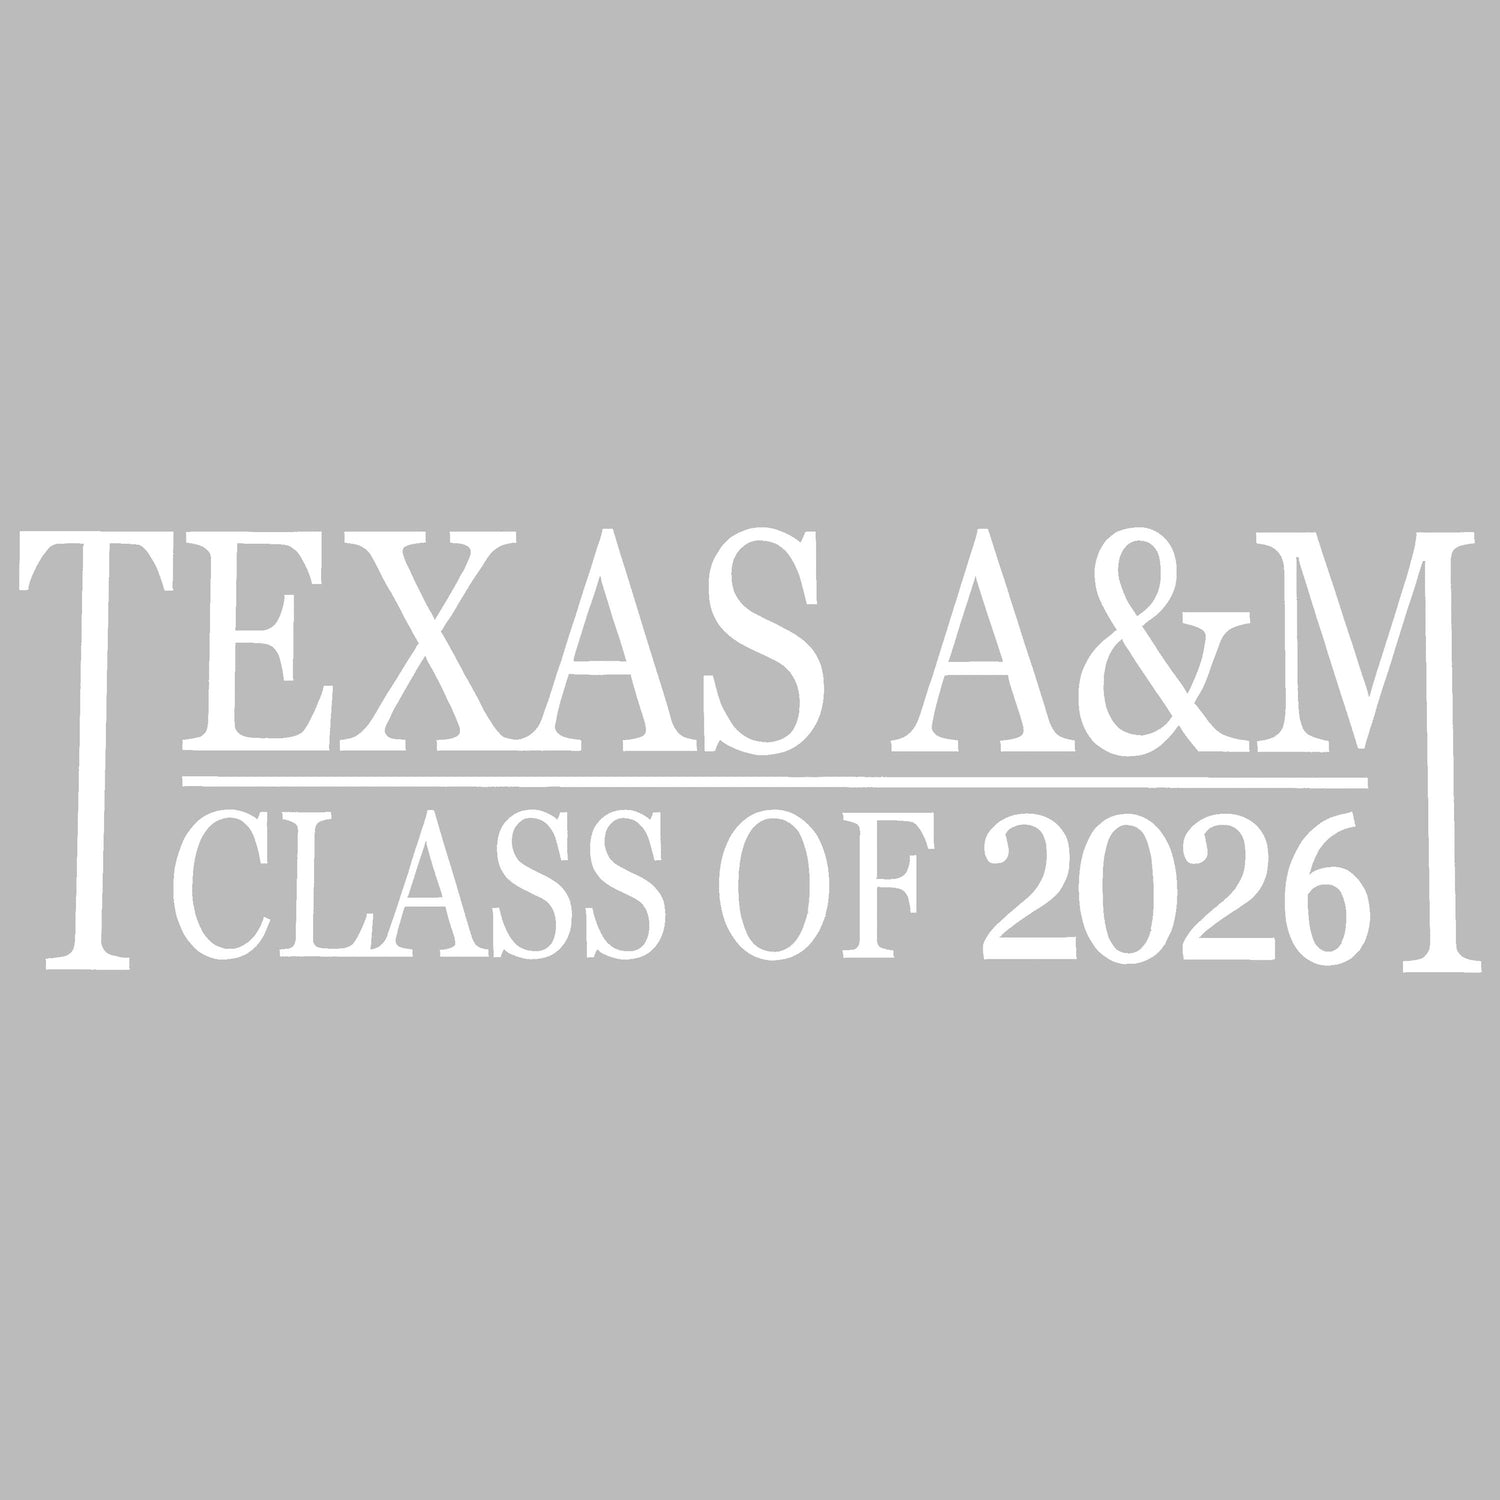 Texas A&M Class Of 2026 Decal